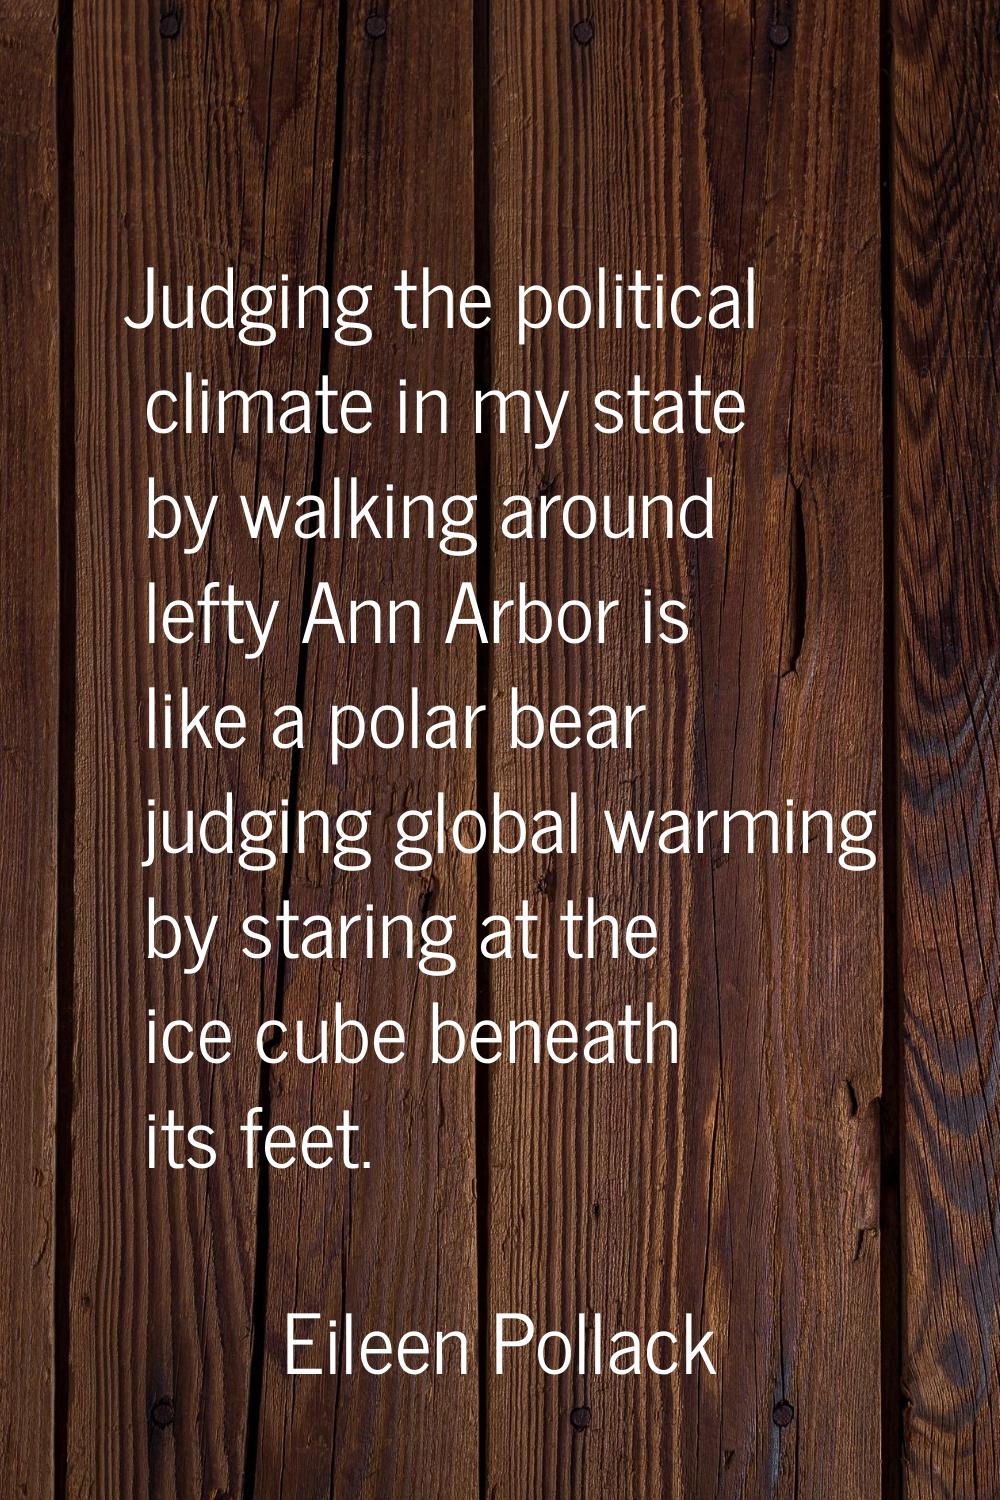 Judging the political climate in my state by walking around lefty Ann Arbor is like a polar bear ju